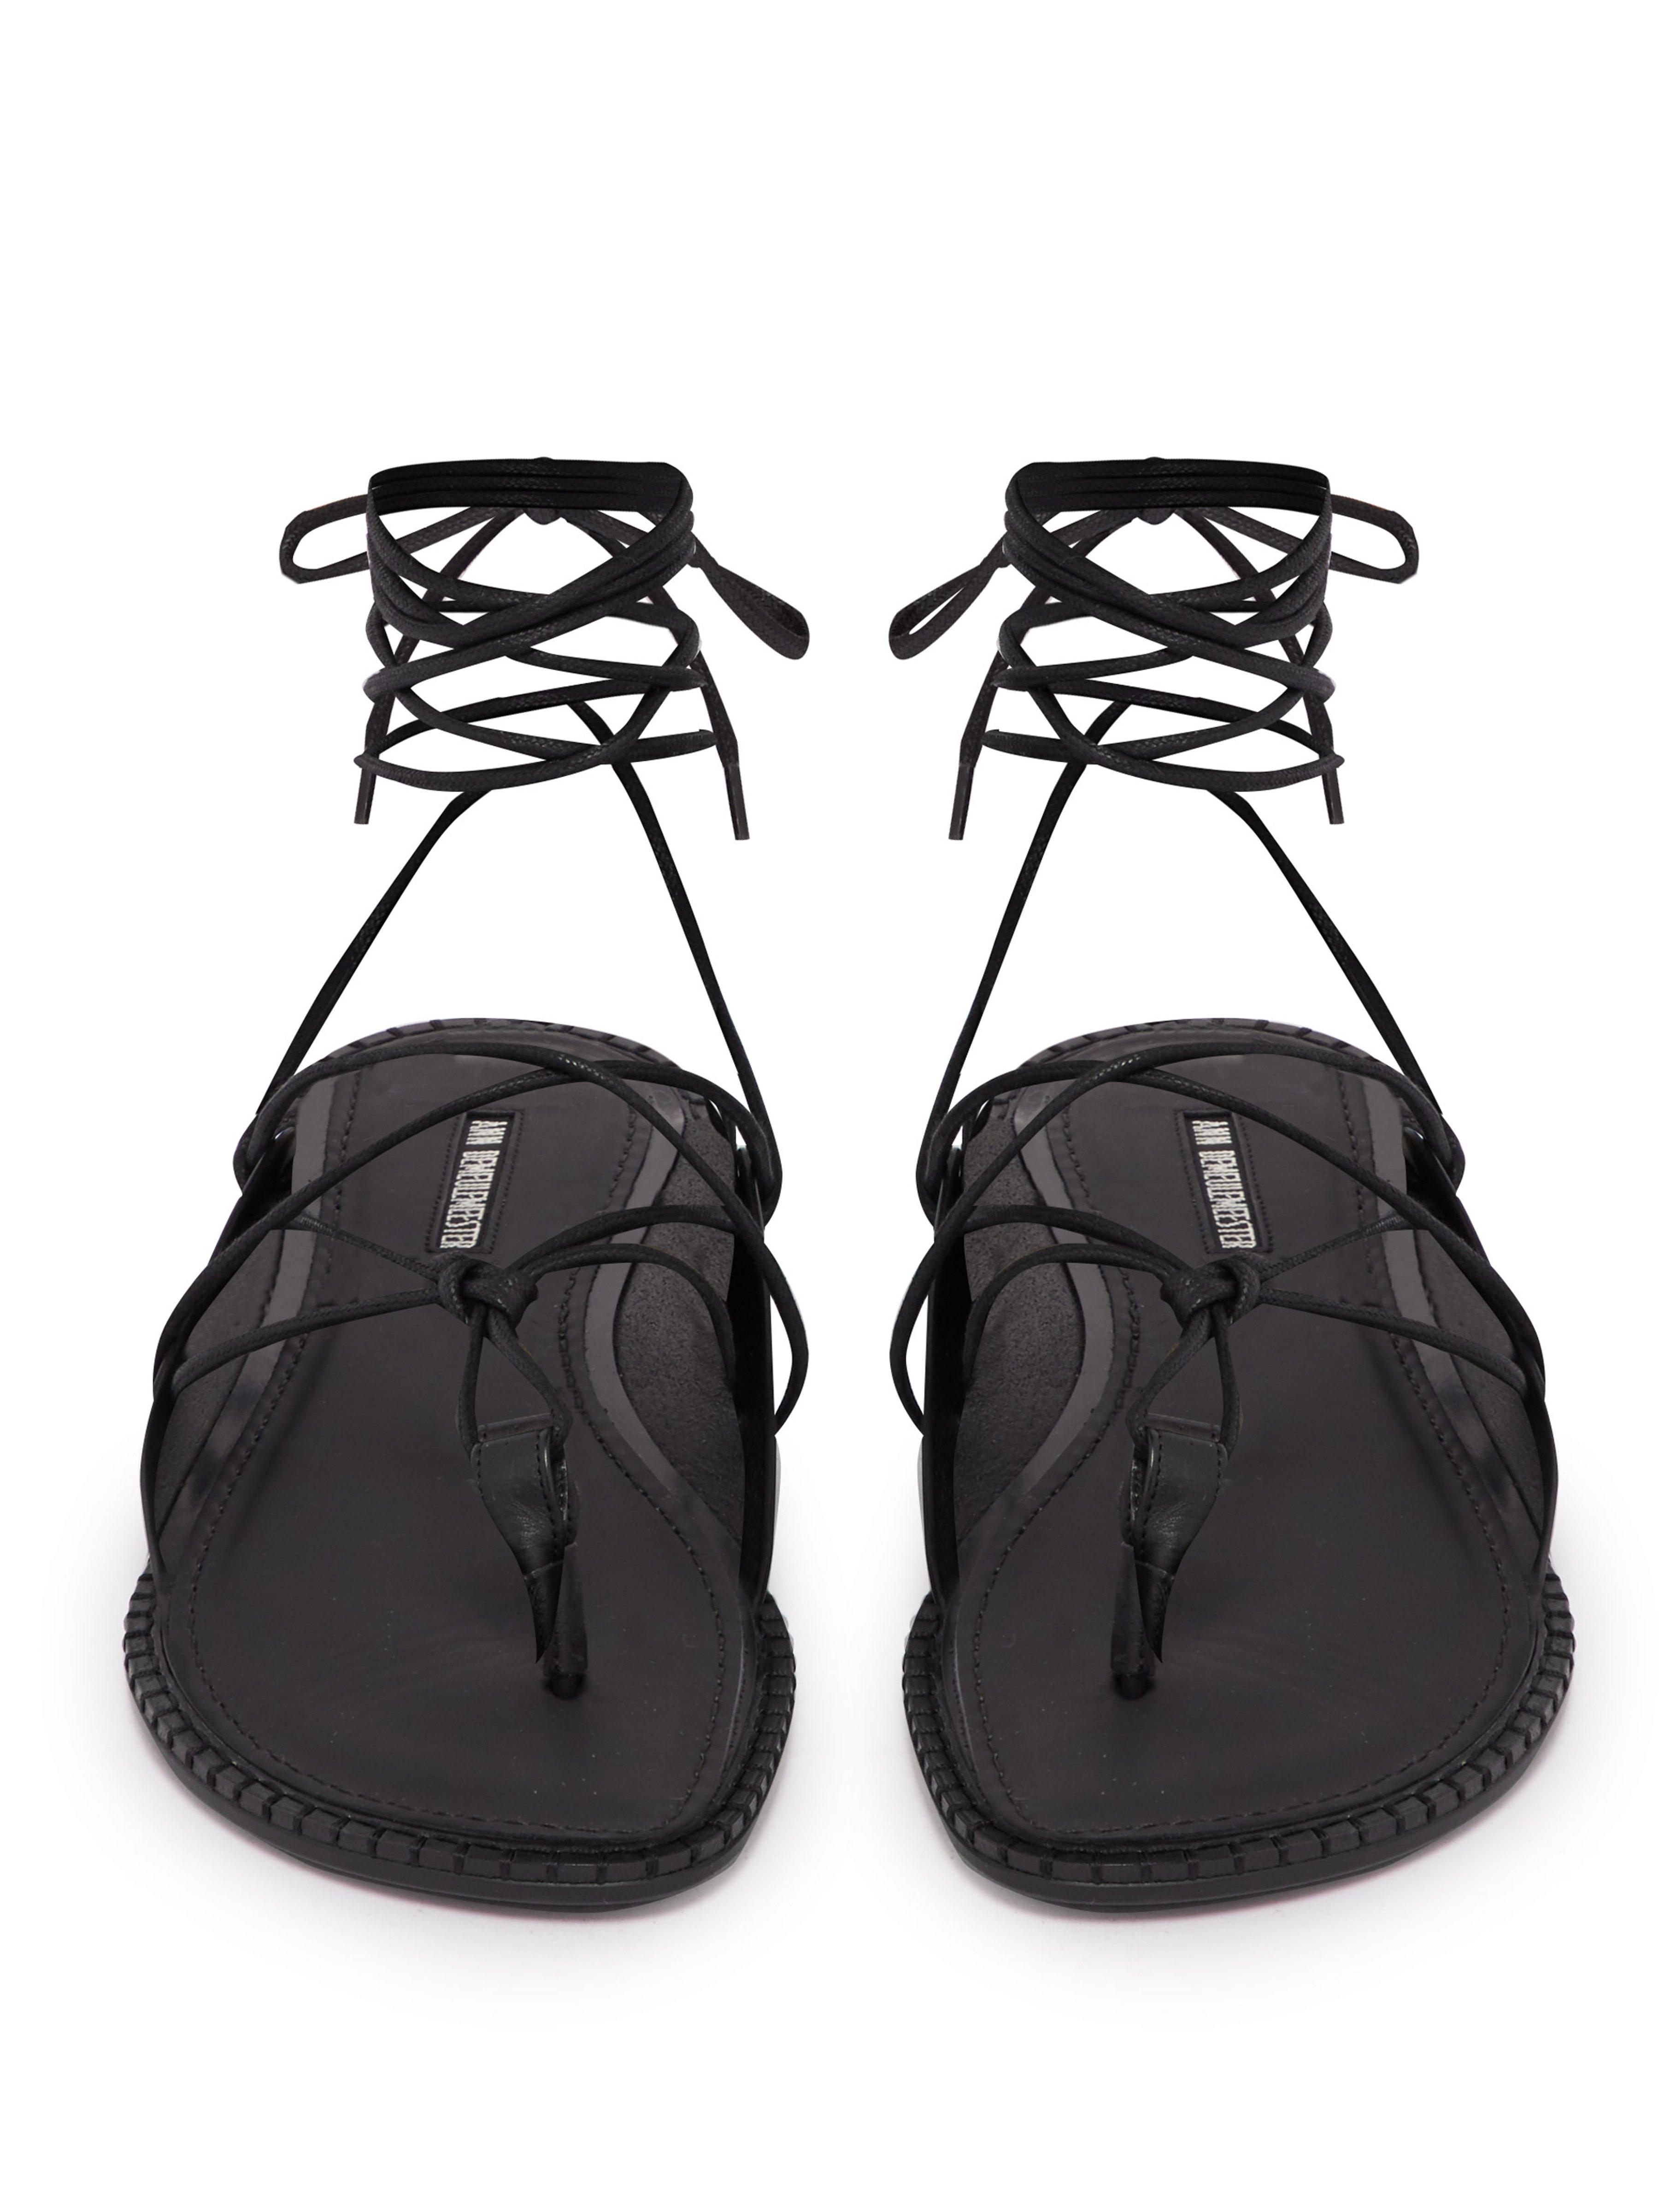 Ann Demeulemeester Wrap Around Leather Sandals in Black for Men - Lyst